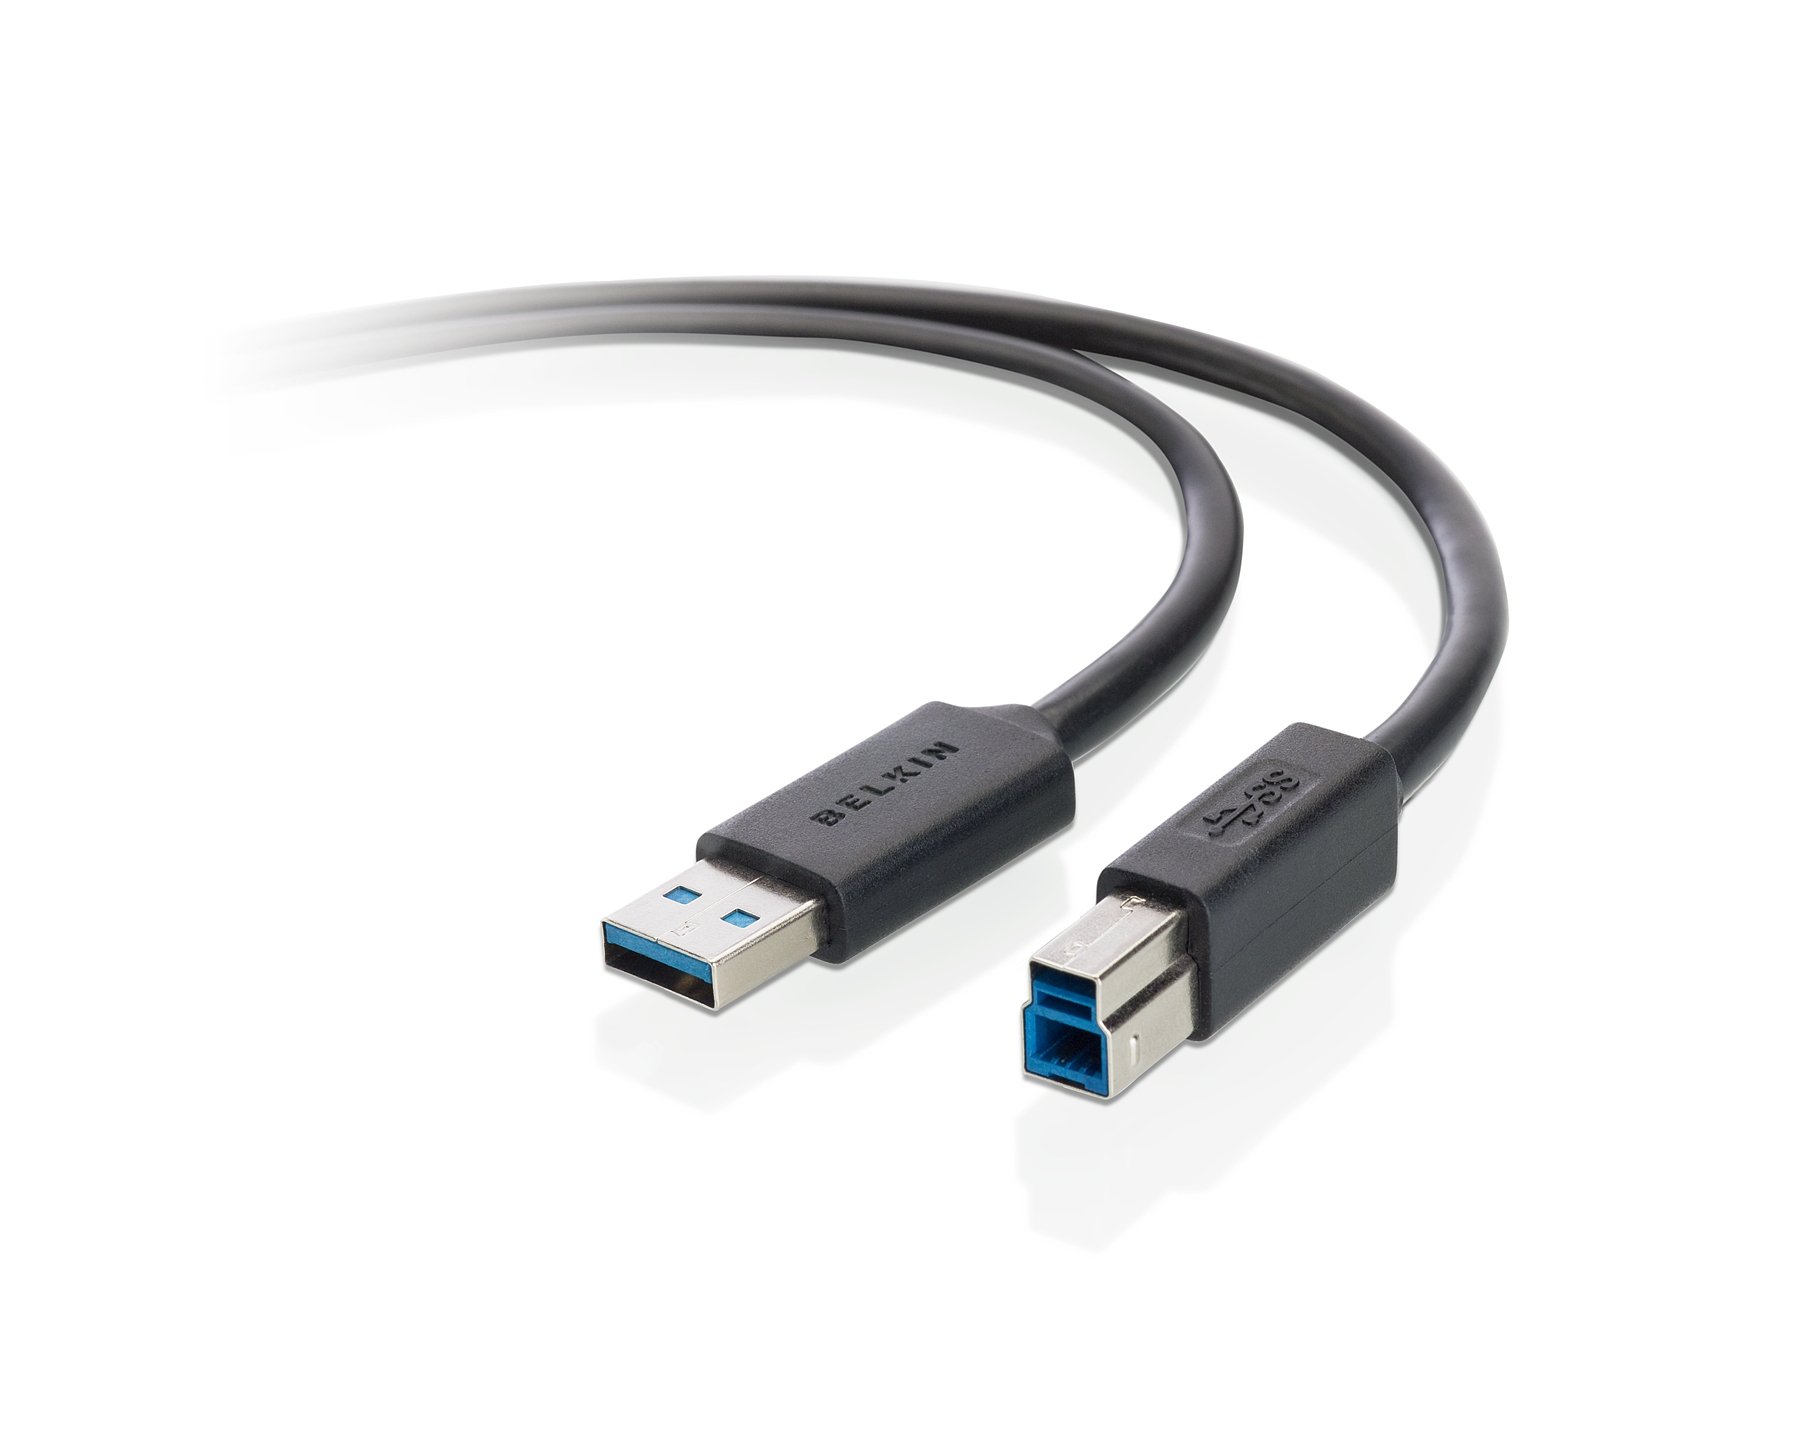 Belkin USB A to USB B Cable - 6 foot USB 3.0 Cable - SuperSpeed USB 3.0 Extension Cable - USB-A to USB-B Printer Cable - Male-to-Male USB Cable - USB Type B Cable - USB Extension - USB Cord - Black